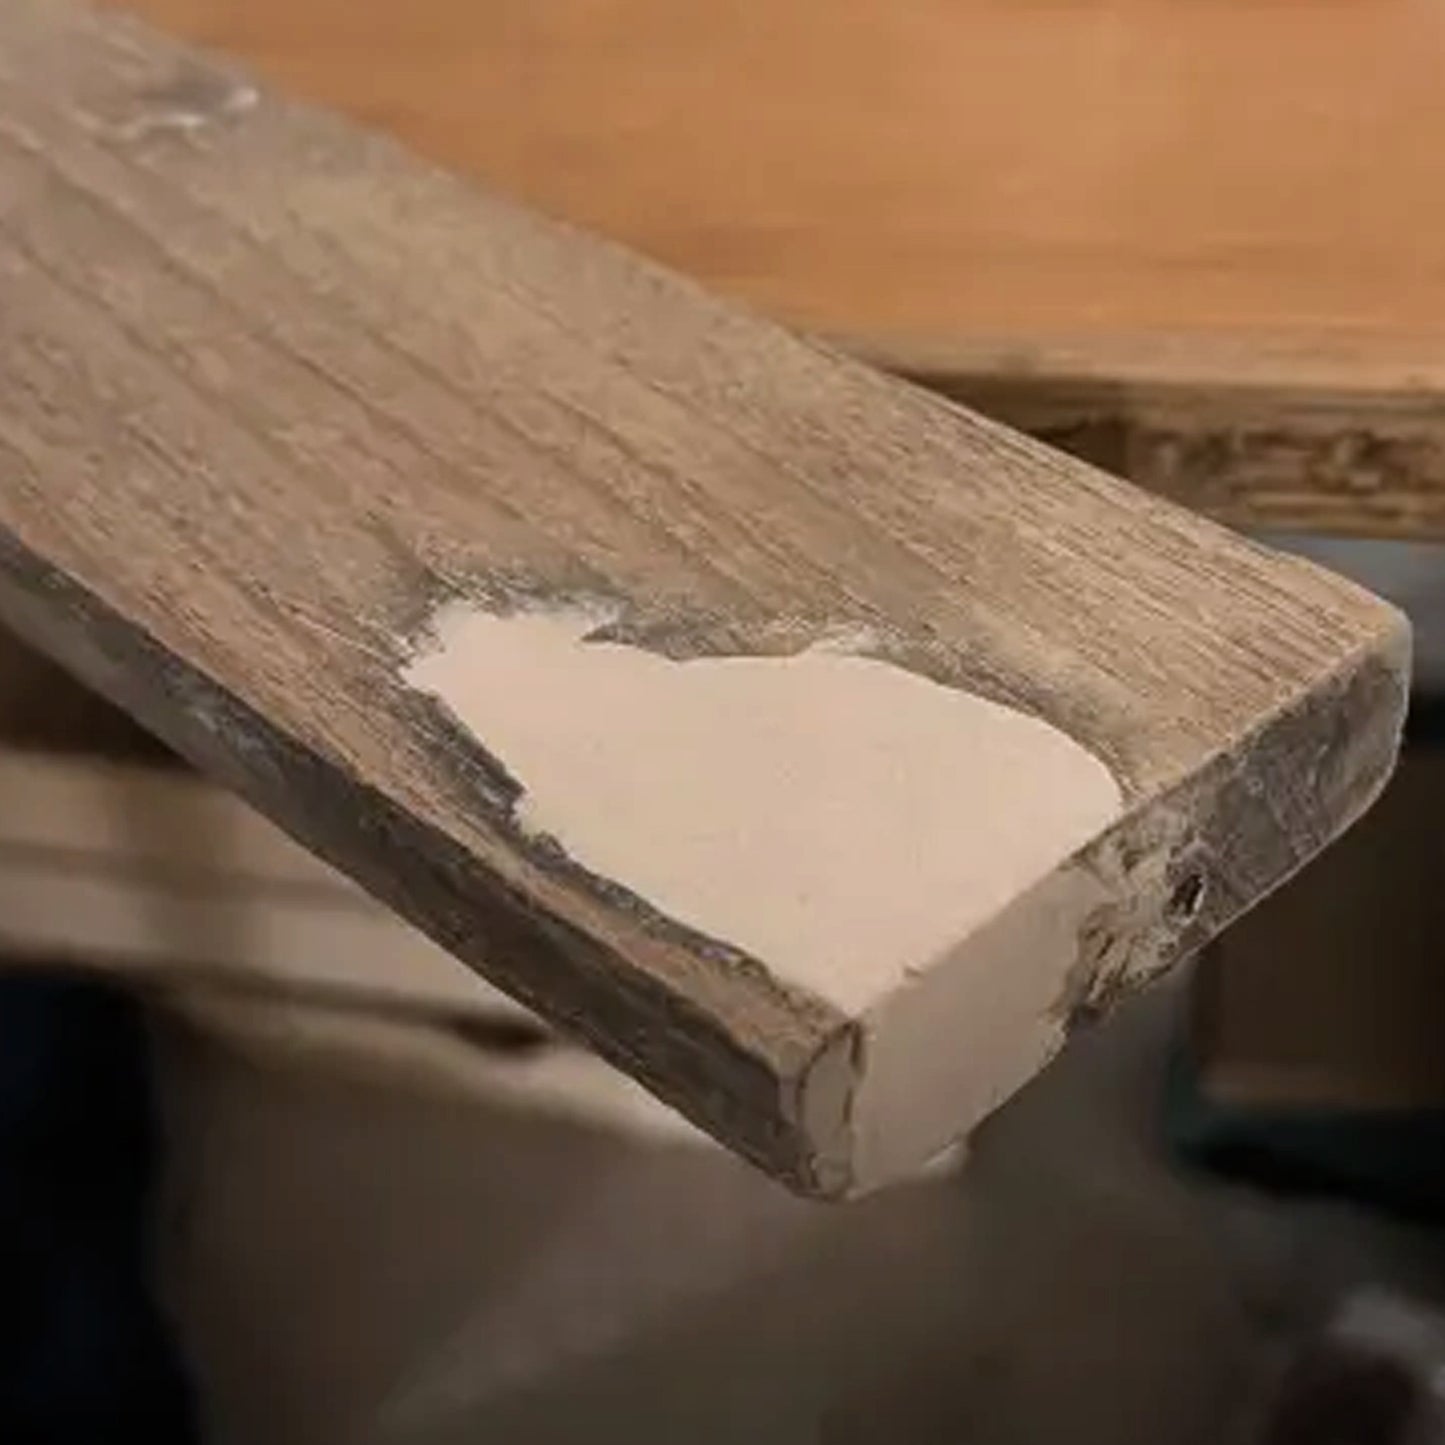 How to Use Epoxy on Wood for Repairs